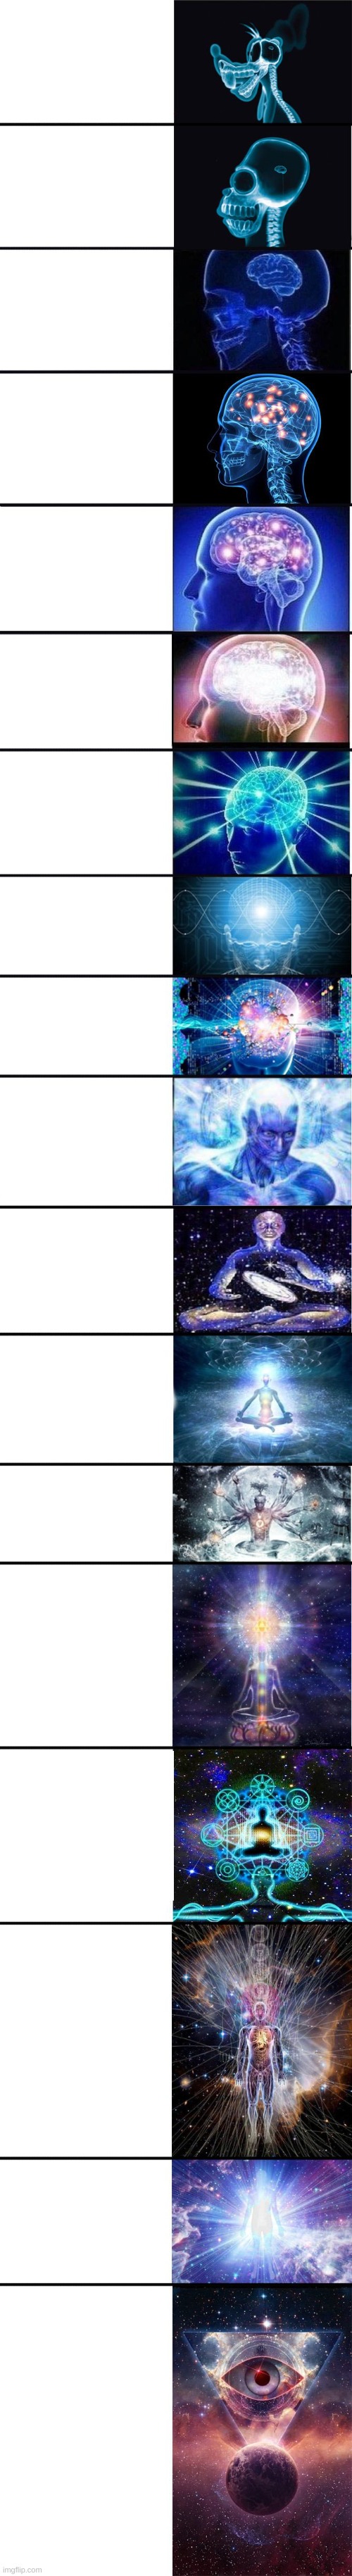 expanding brain: 9001 | image tagged in expanding brain 9001 | made w/ Imgflip meme maker